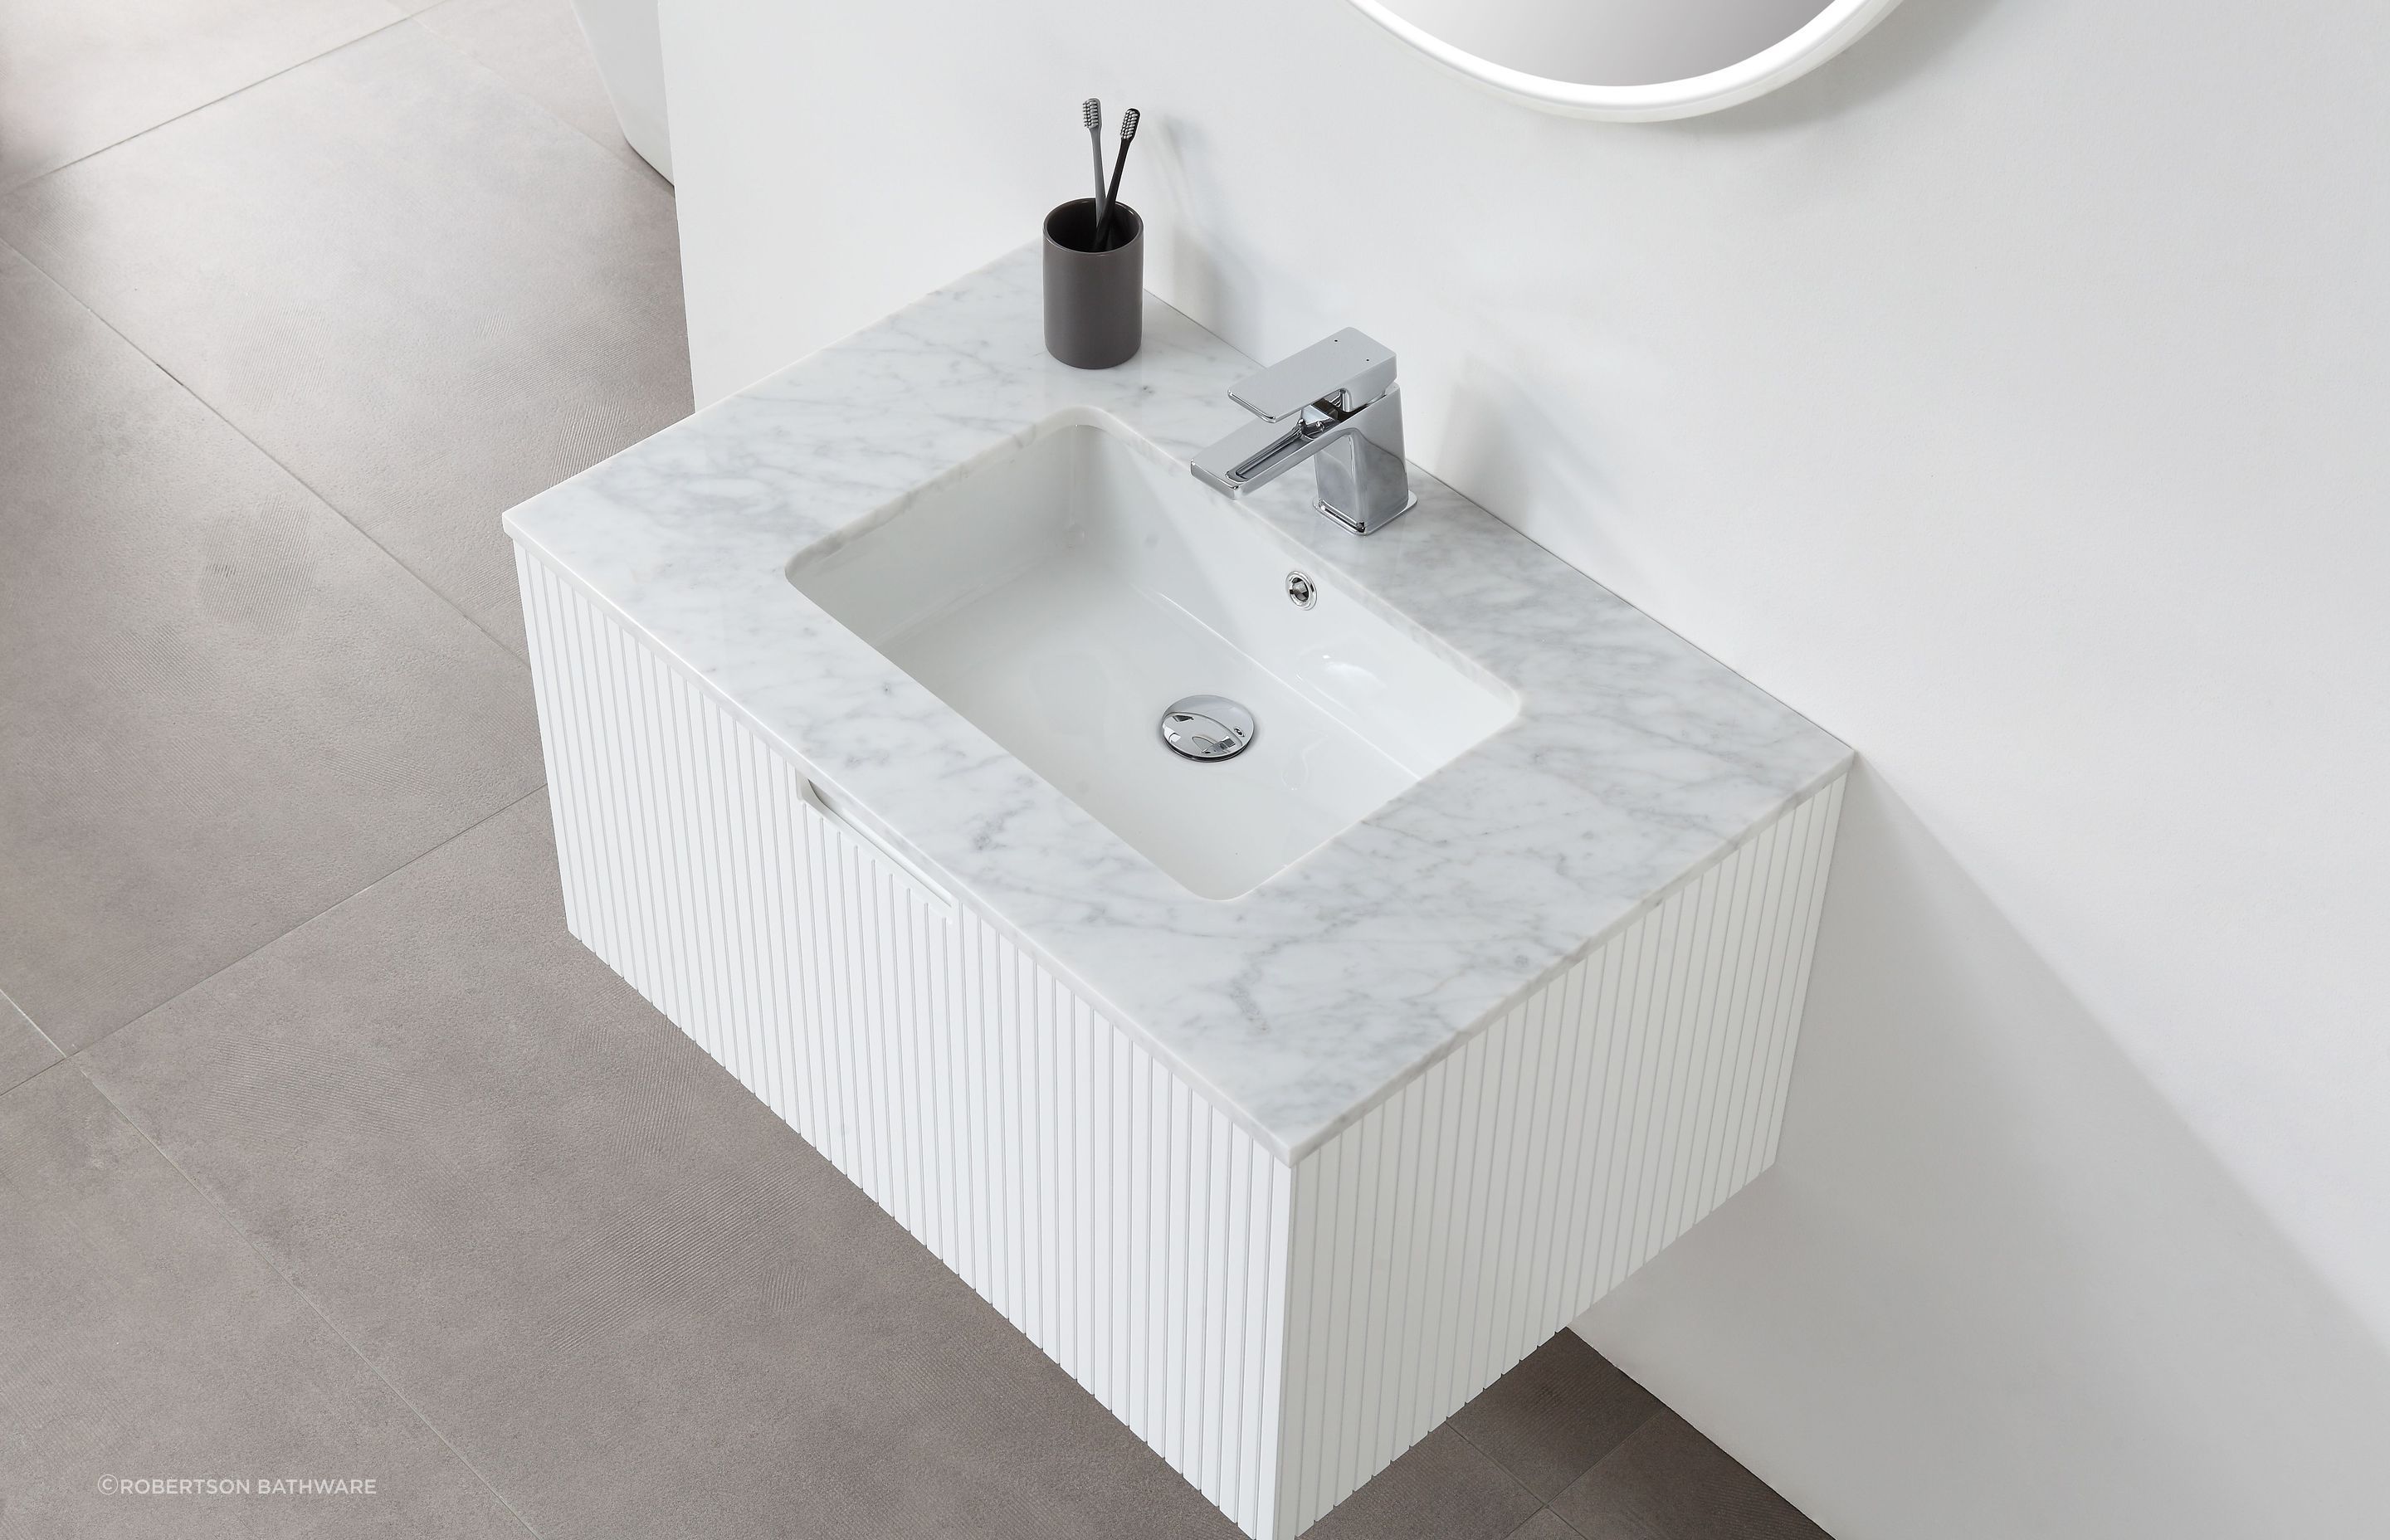 The undeniable luxuriousness of marble, seen here with the Parisi Vanity.